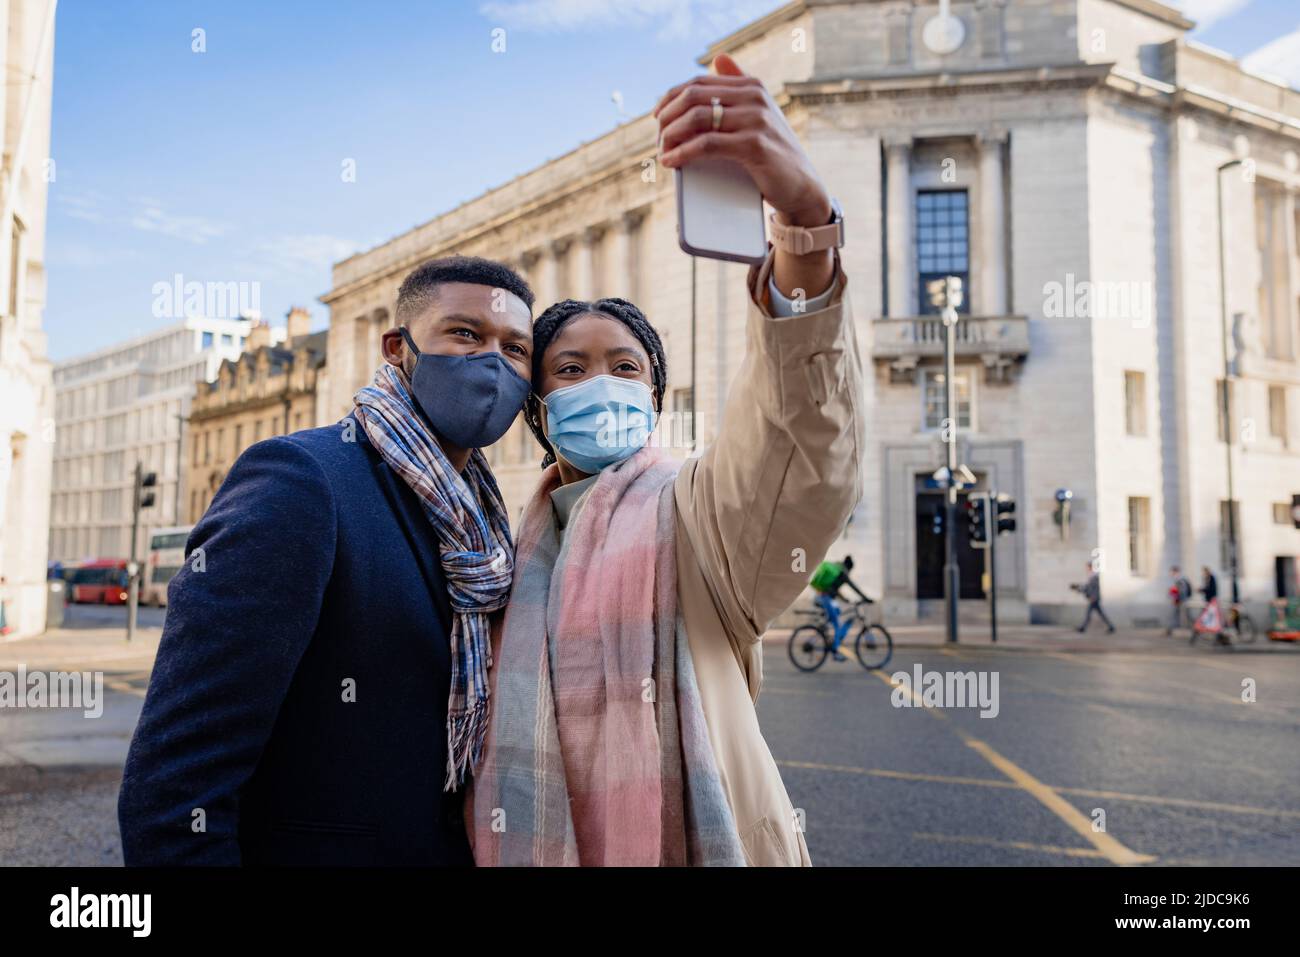 Couple in town wearing face masks holding mobile phone and taking selfie Stock Photo